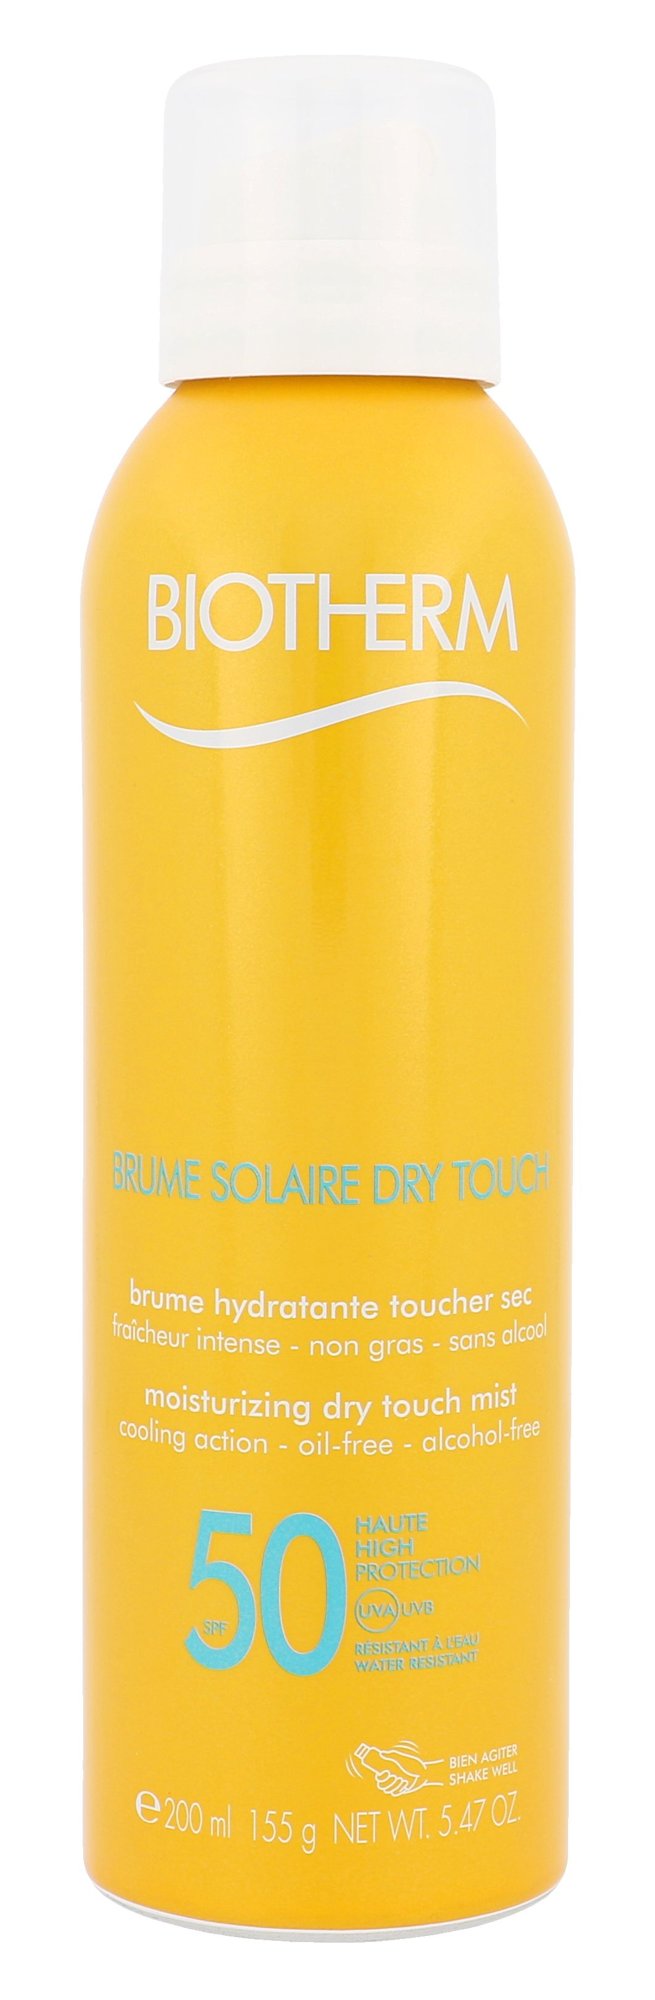 Biotherm Brume Solaire Dry Touch Mist SPF50